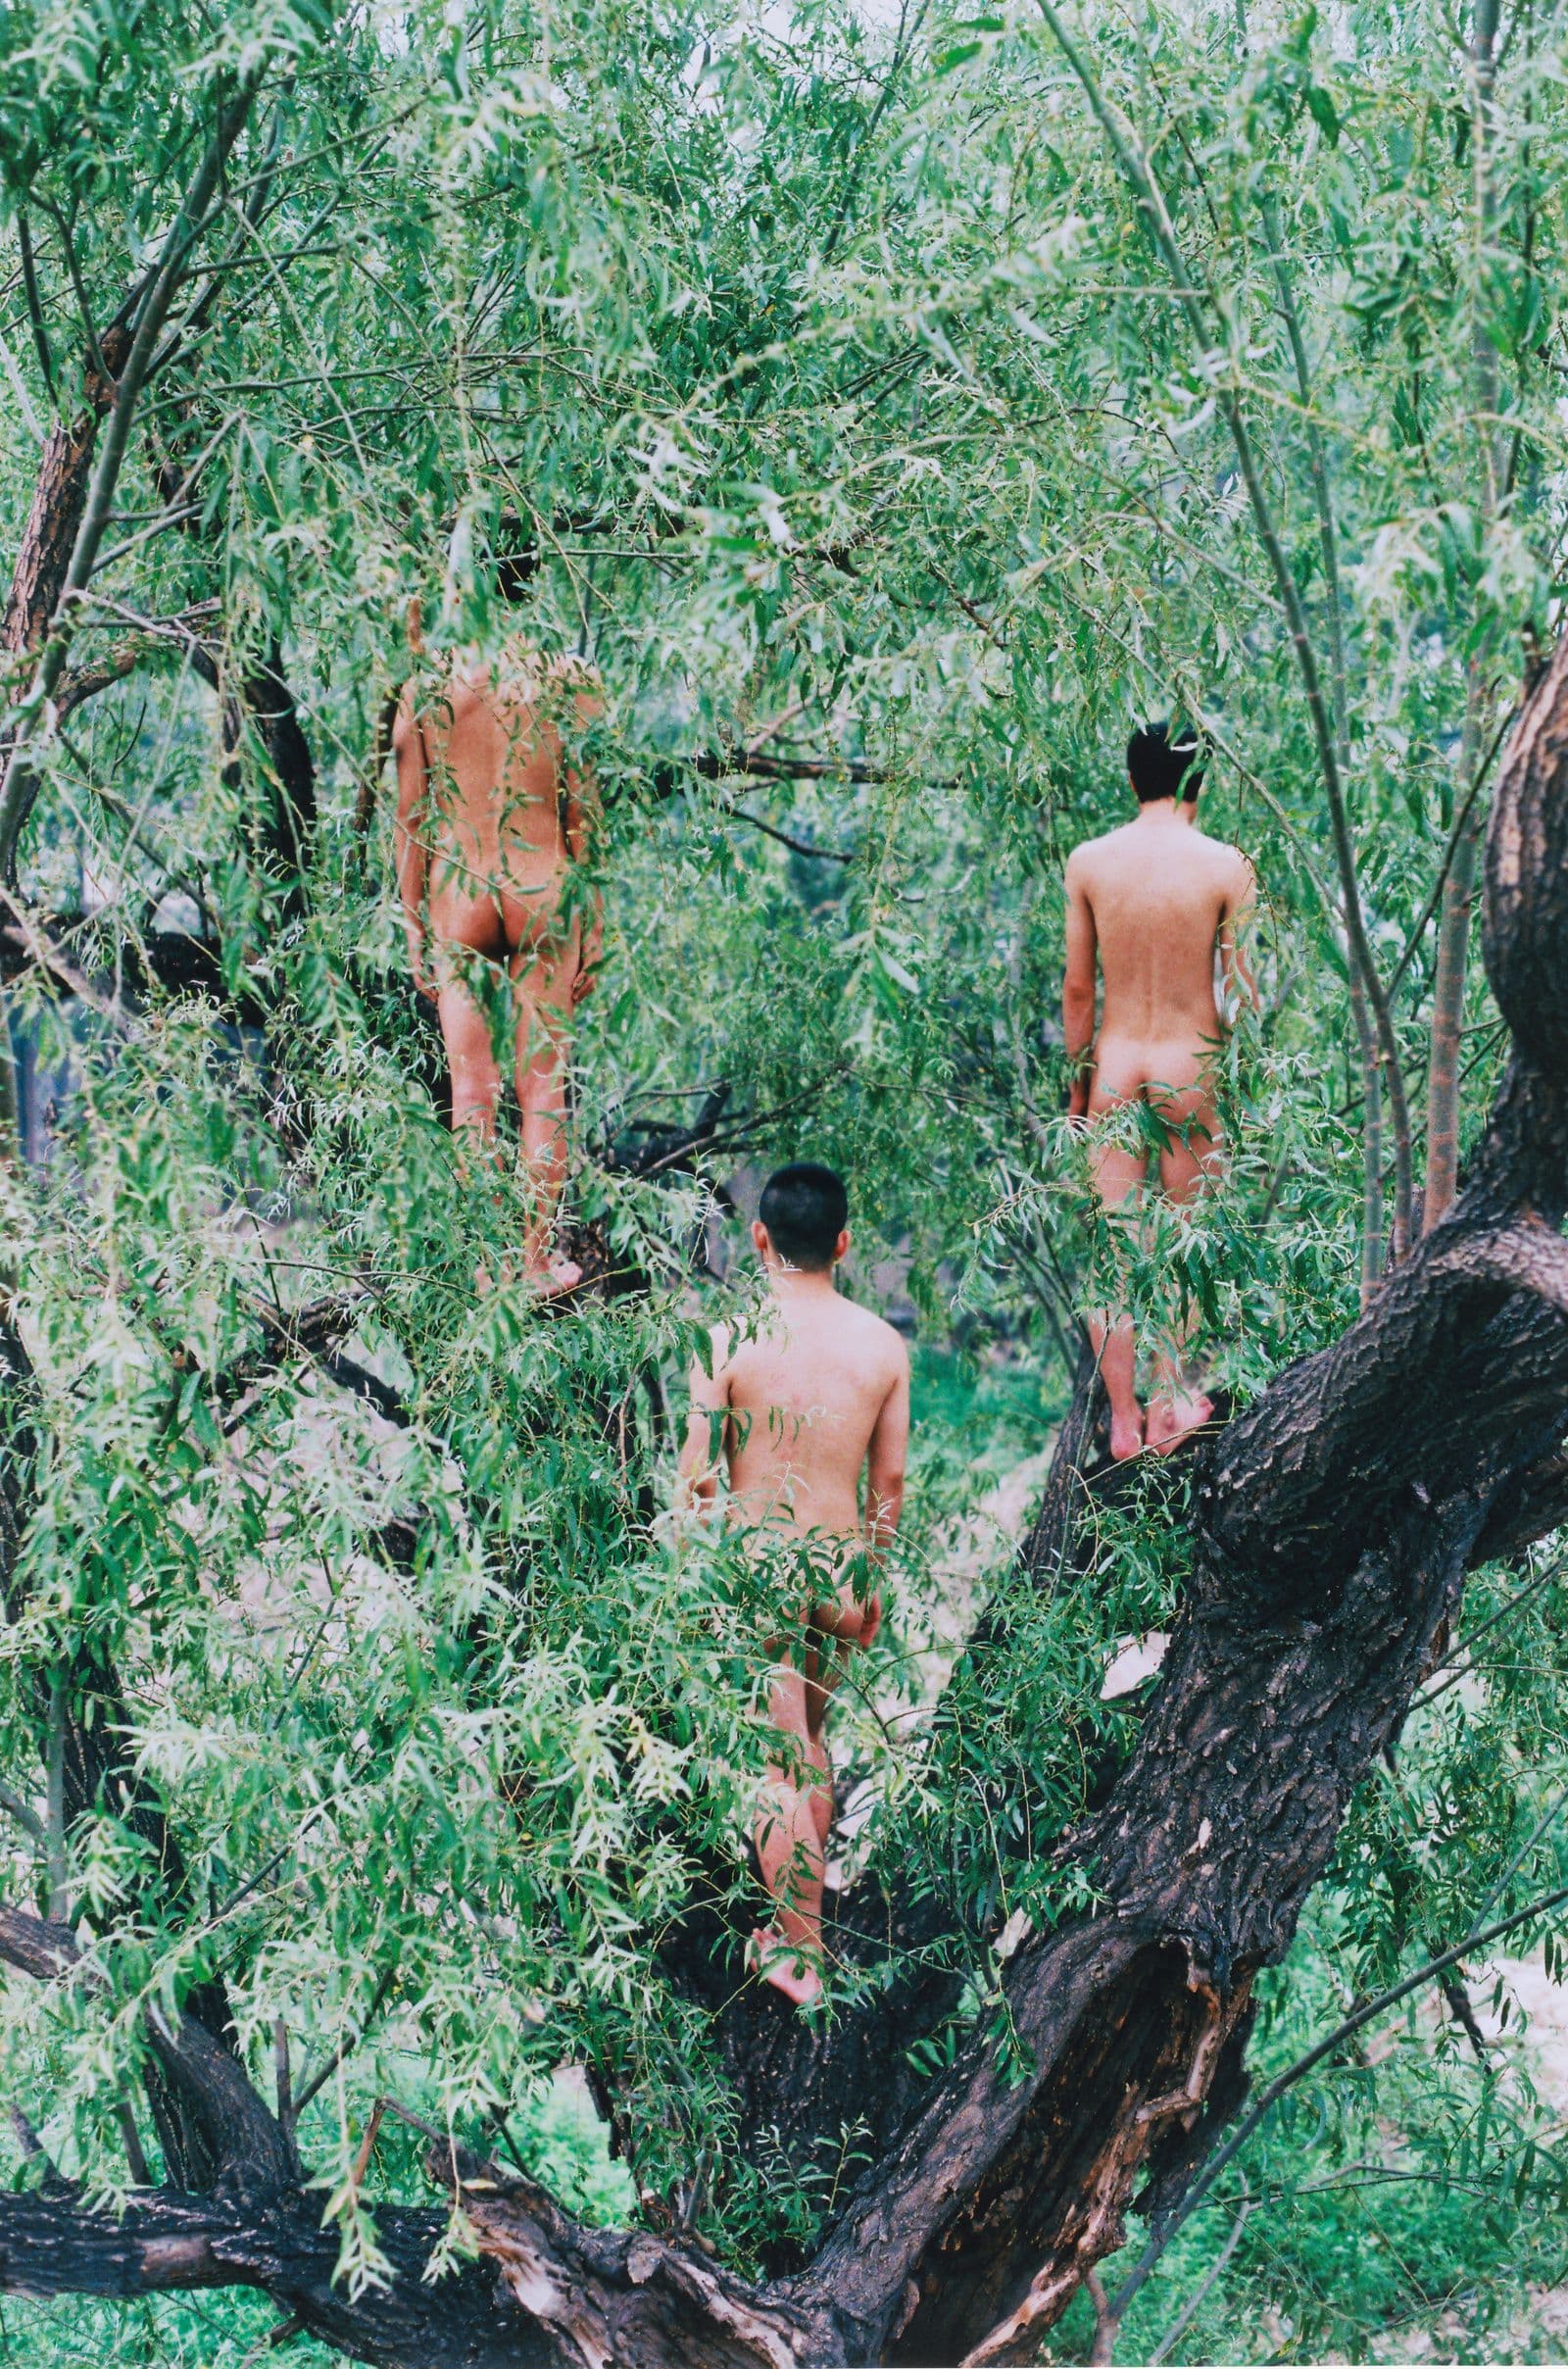 A picture of green trees with naked people hidden in the foliage